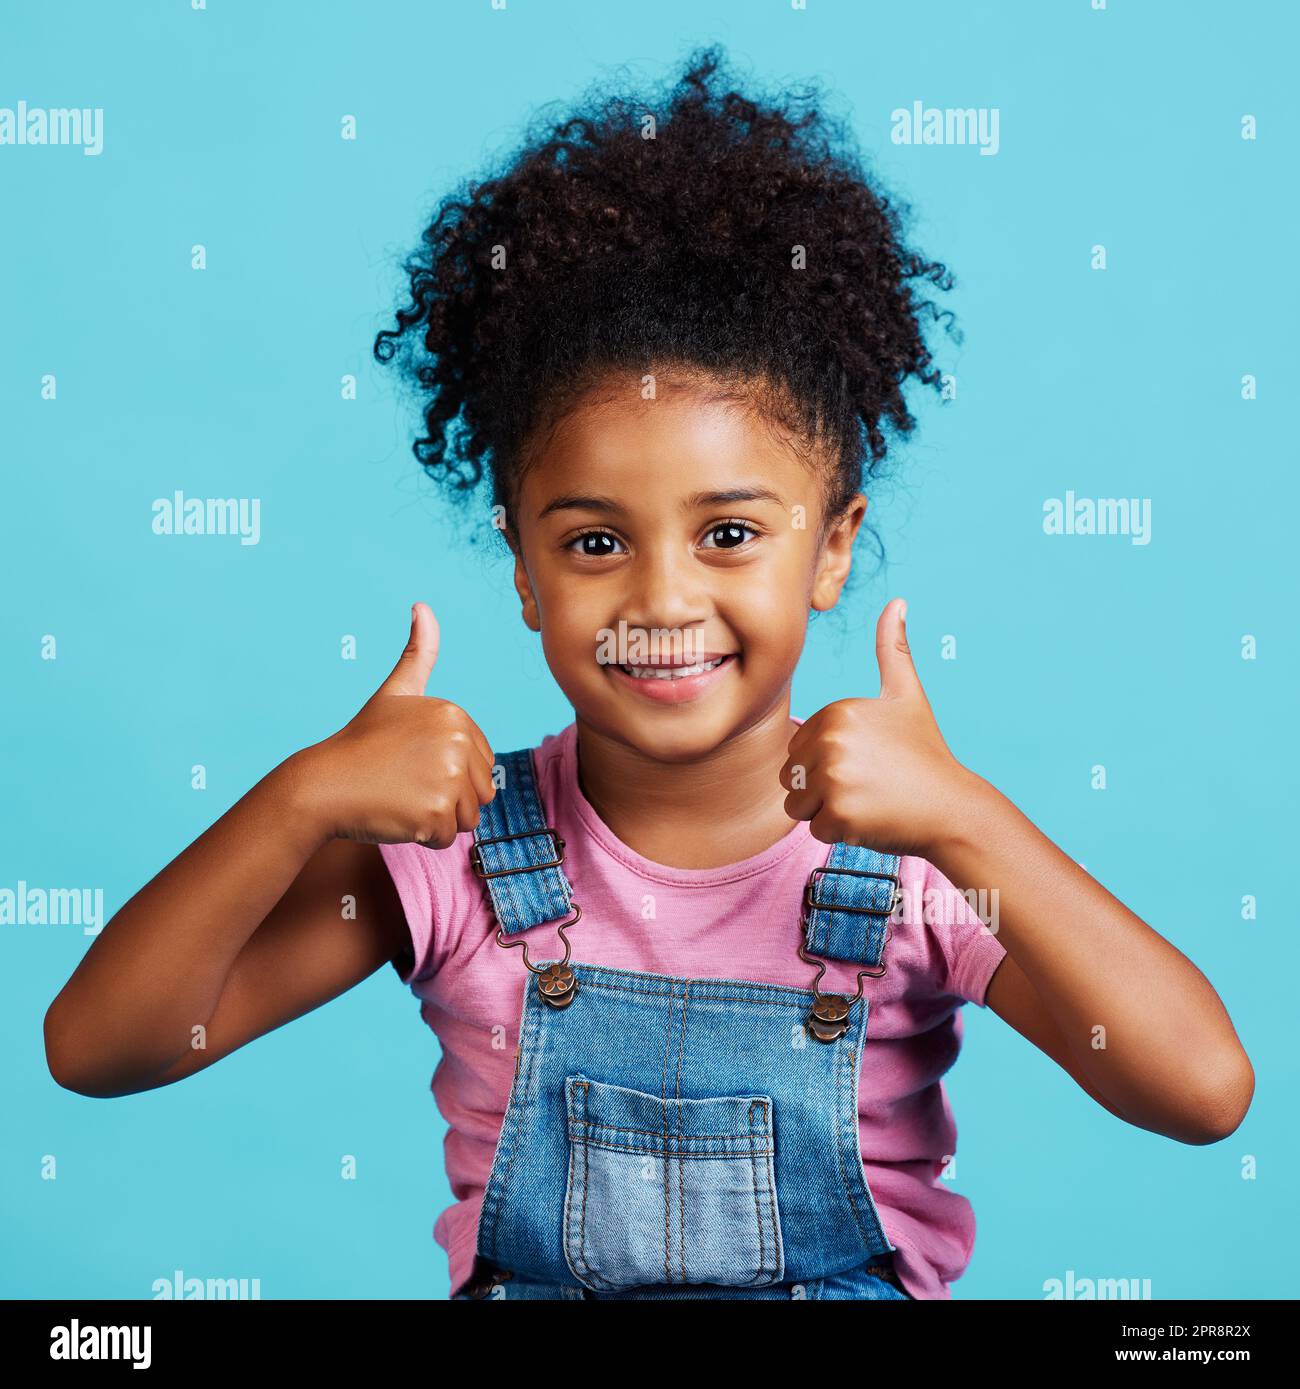 Just be happy. an adorable little girl showing thumbs up while standing against a blue background. Stock Photo